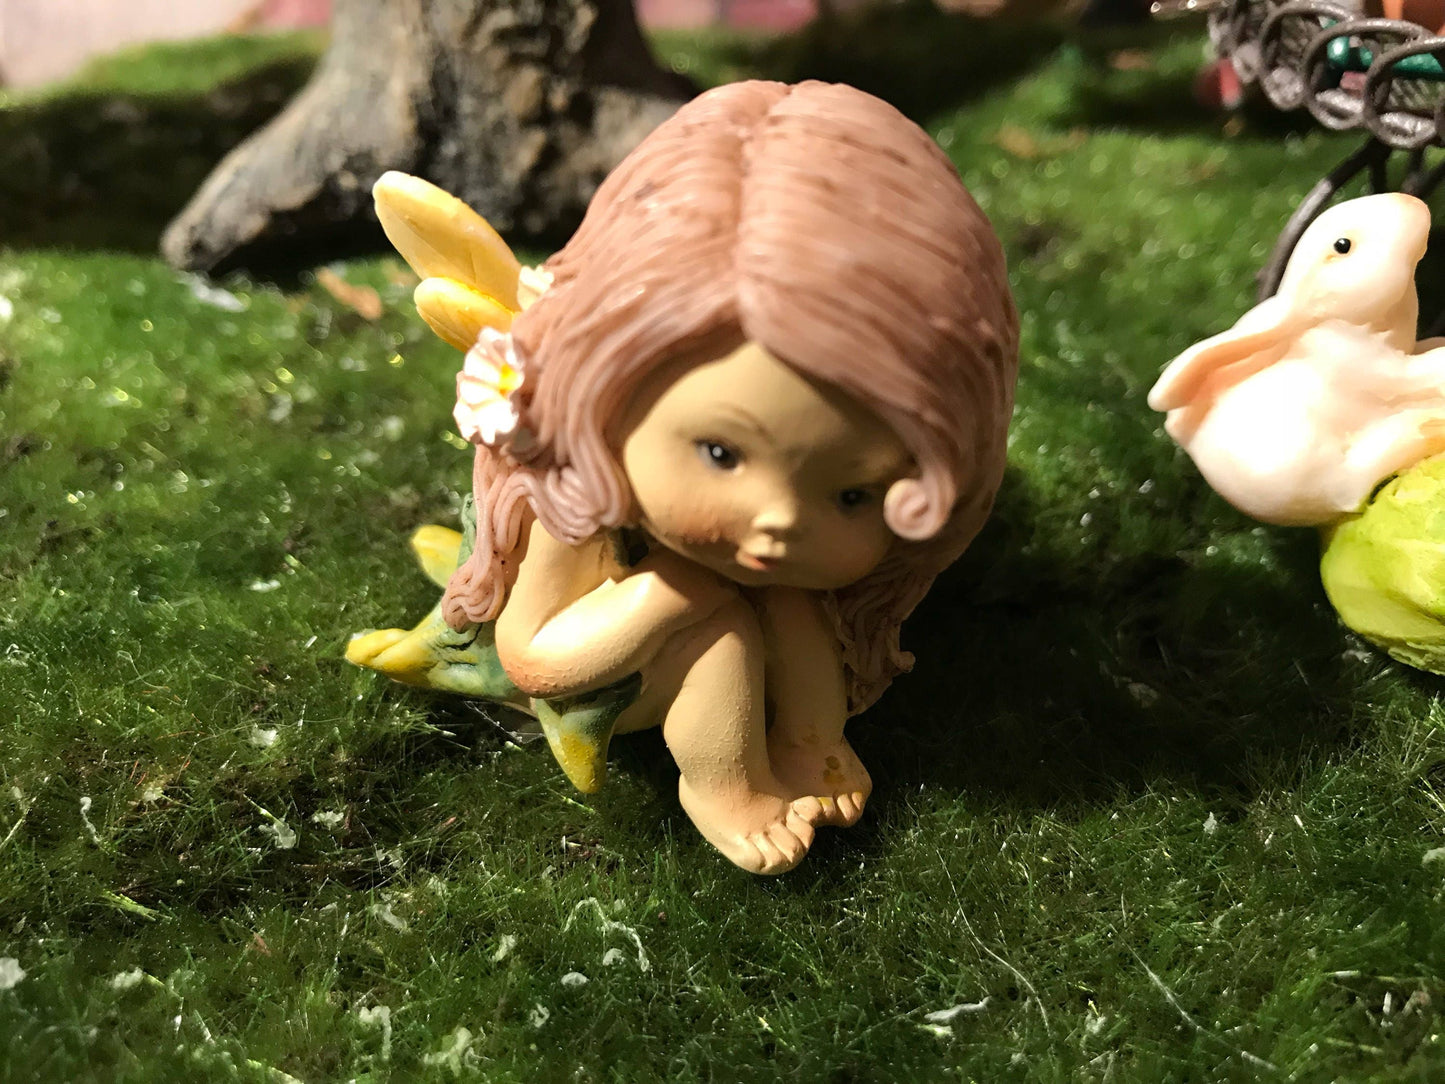 Little fairy with sweet face in deep wonder